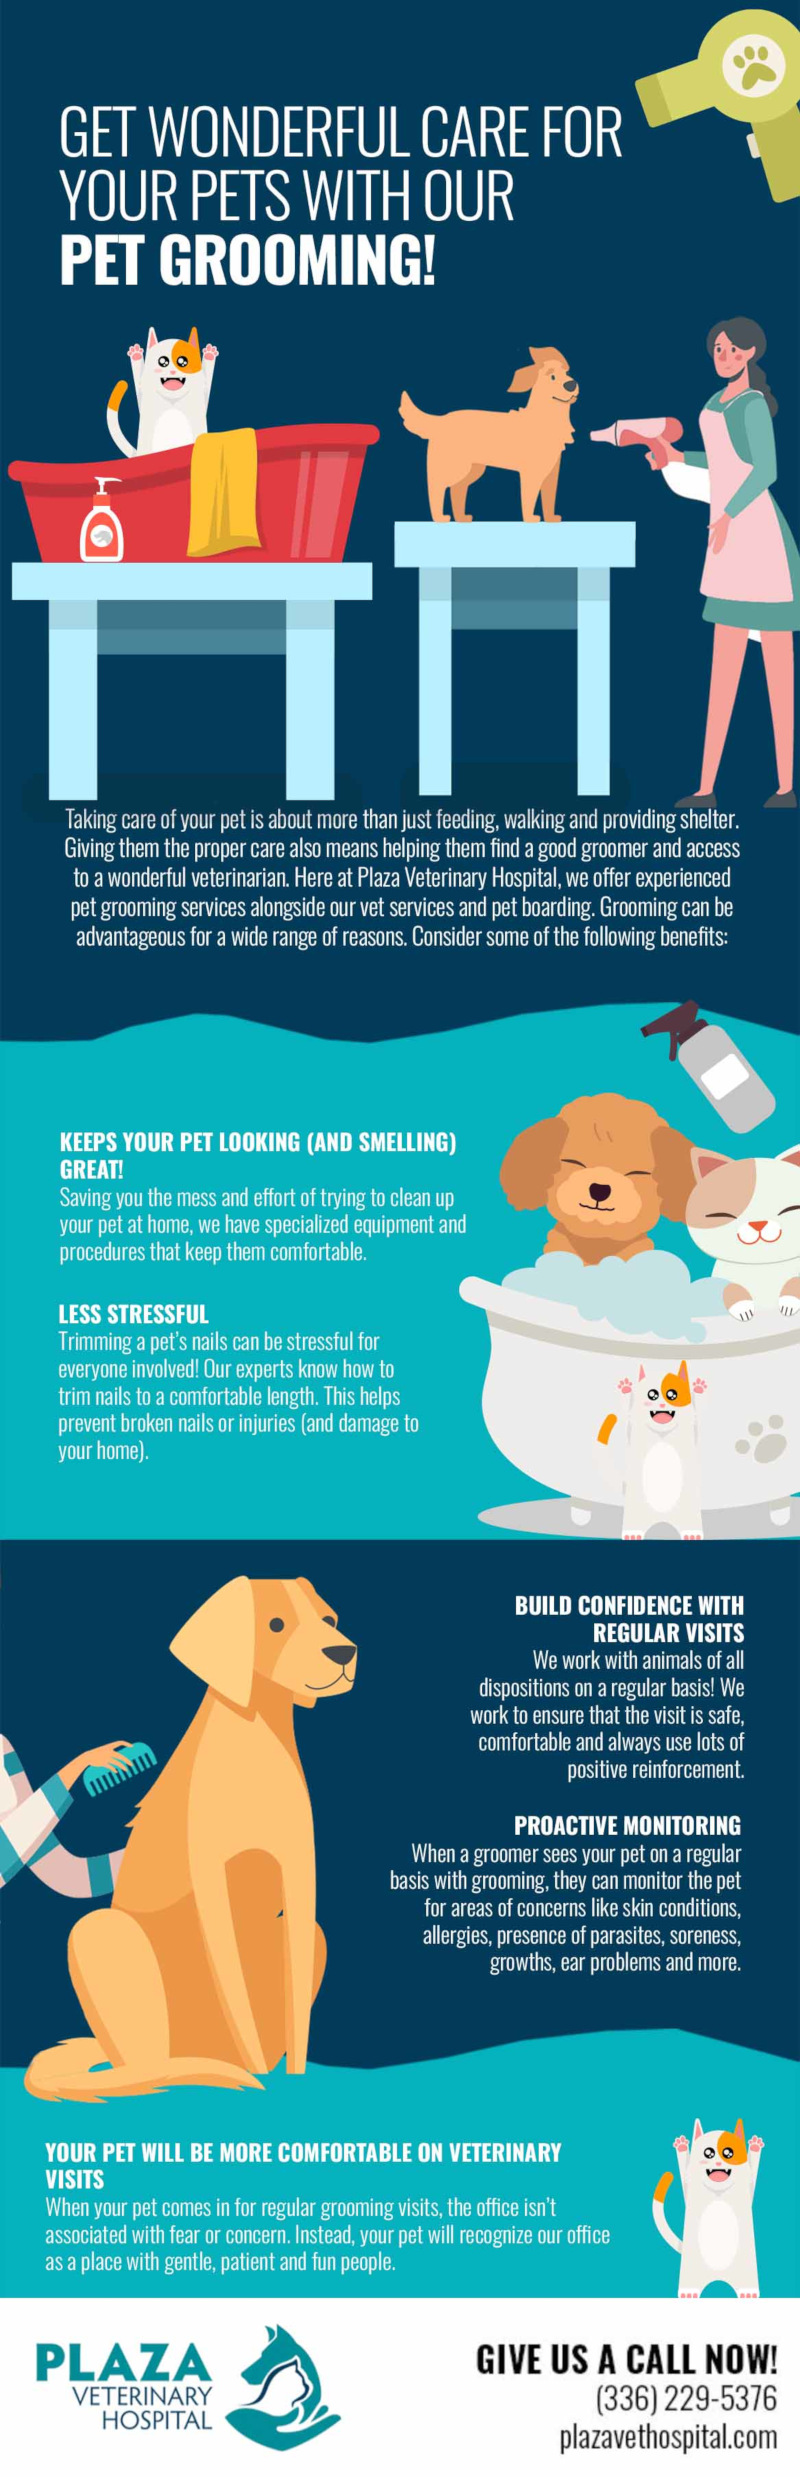 Get the best care for your pet at our full-service vet clinic!